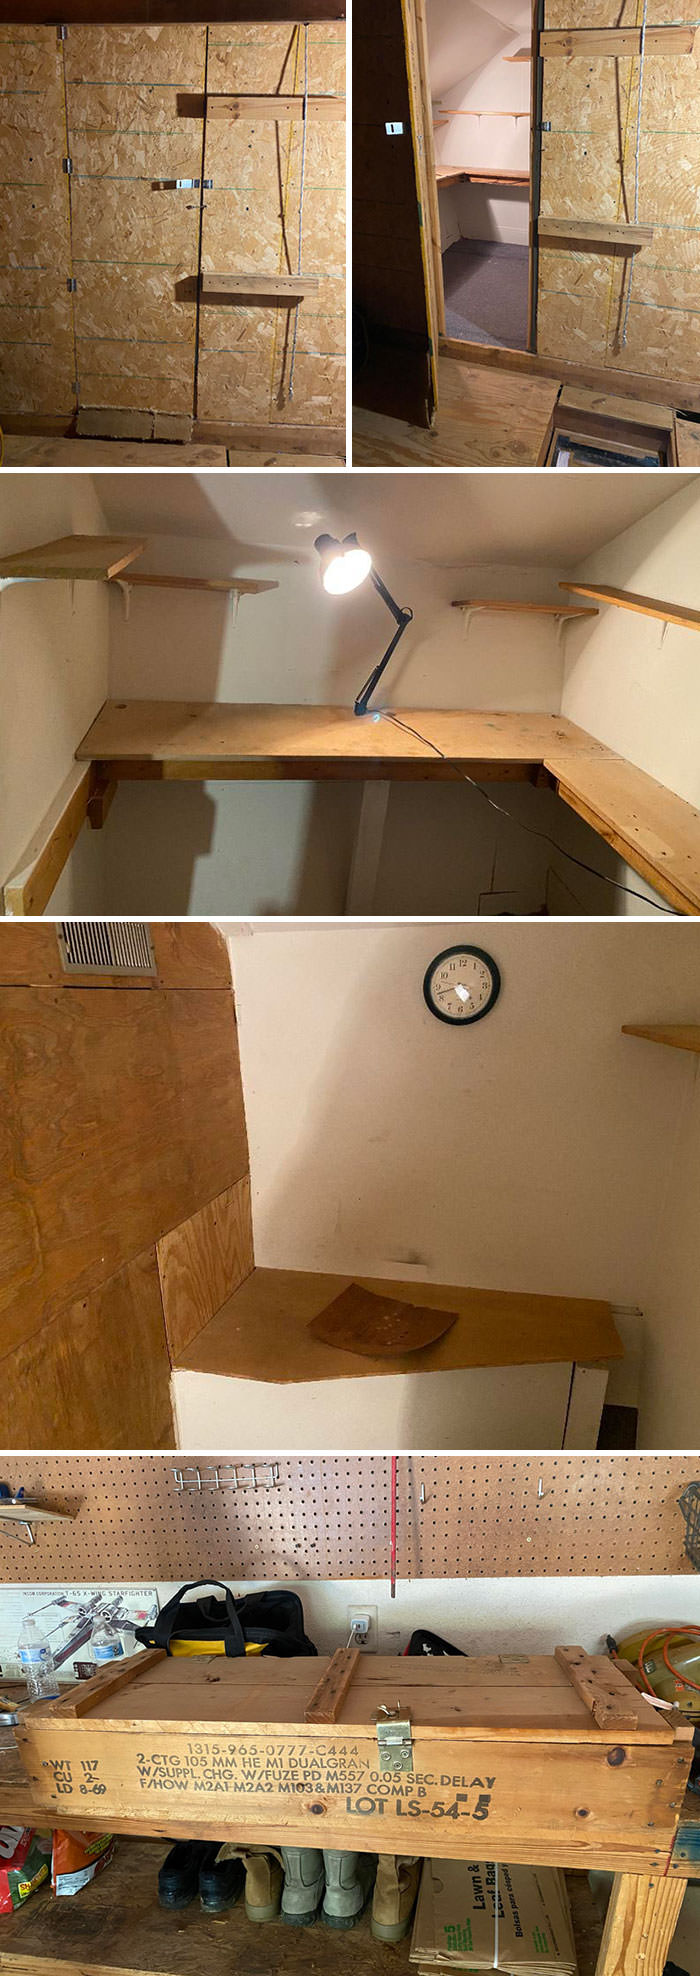 Found a weird room in the attic of my new house. It was not listed on any of the realtor postings, fully carpeted, has power, and is connected to the house's a/c unit